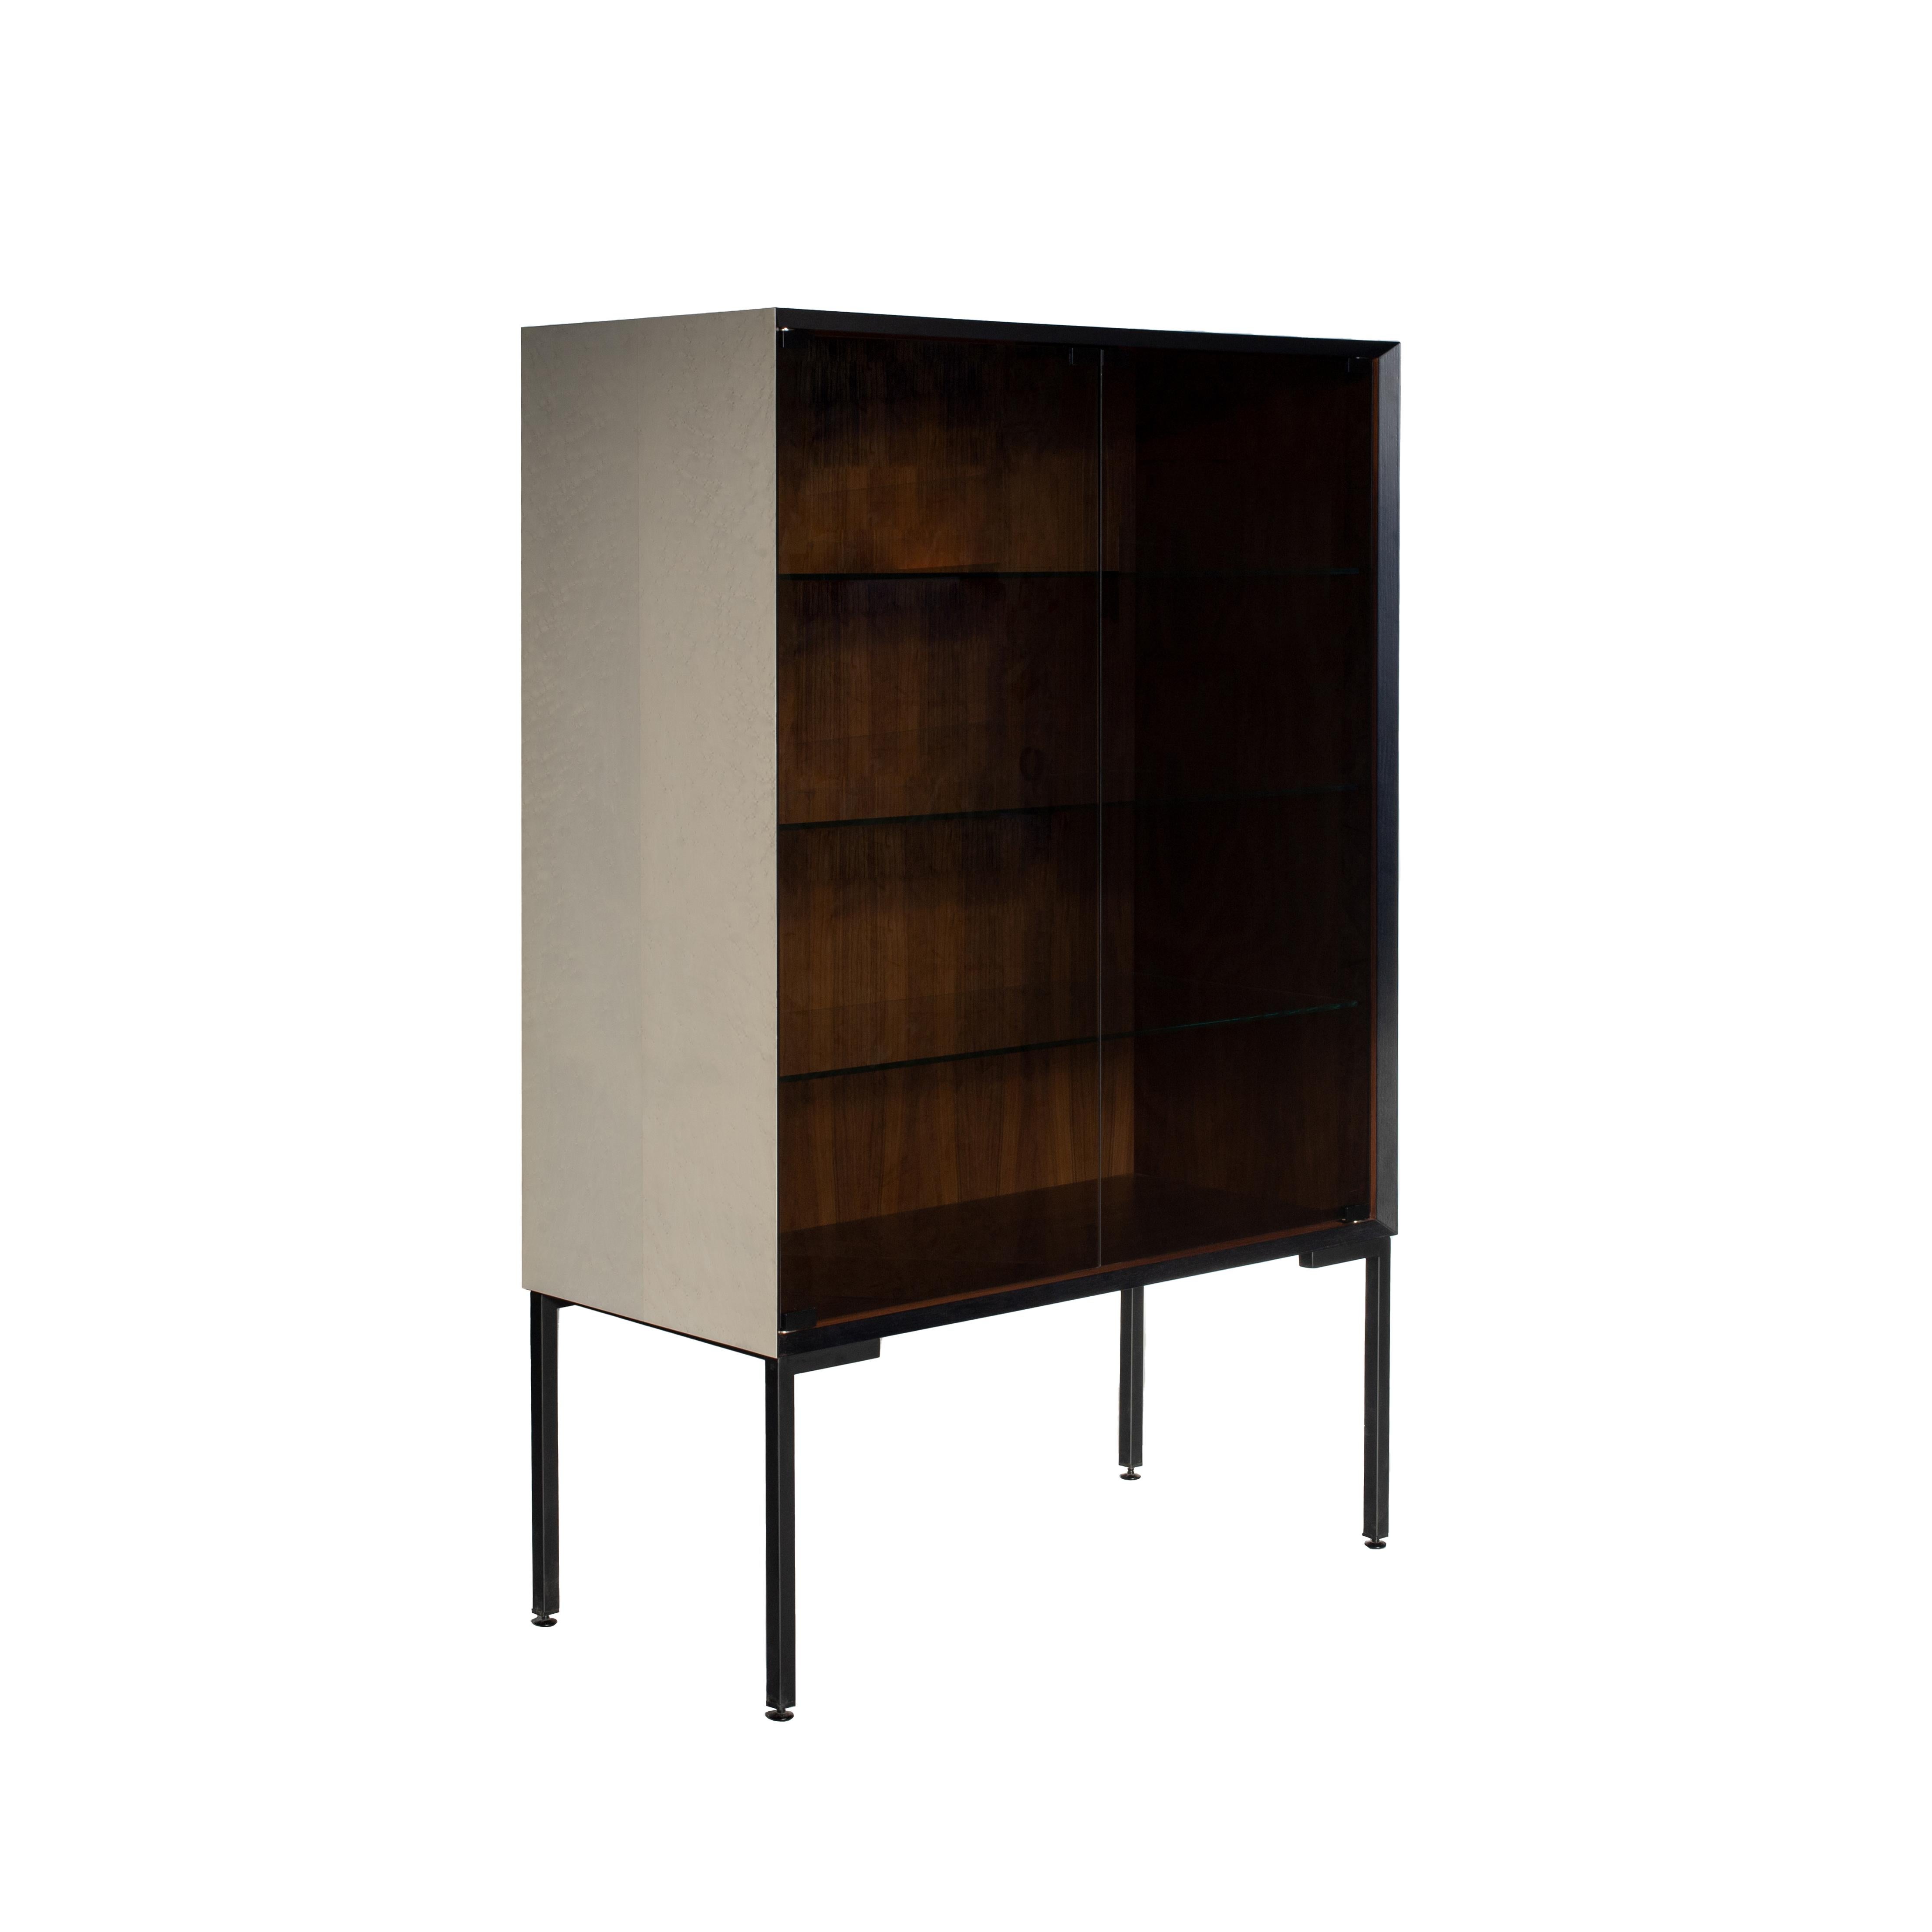 Cabinet in Bois de Violette, black stained ash and bleached maple, Canaletto walnut interior, matt black finish brushed iron feet. Doors and central shelves in smoked glassAlso available in cedar or other woods on request.

Designer:
Hebanon